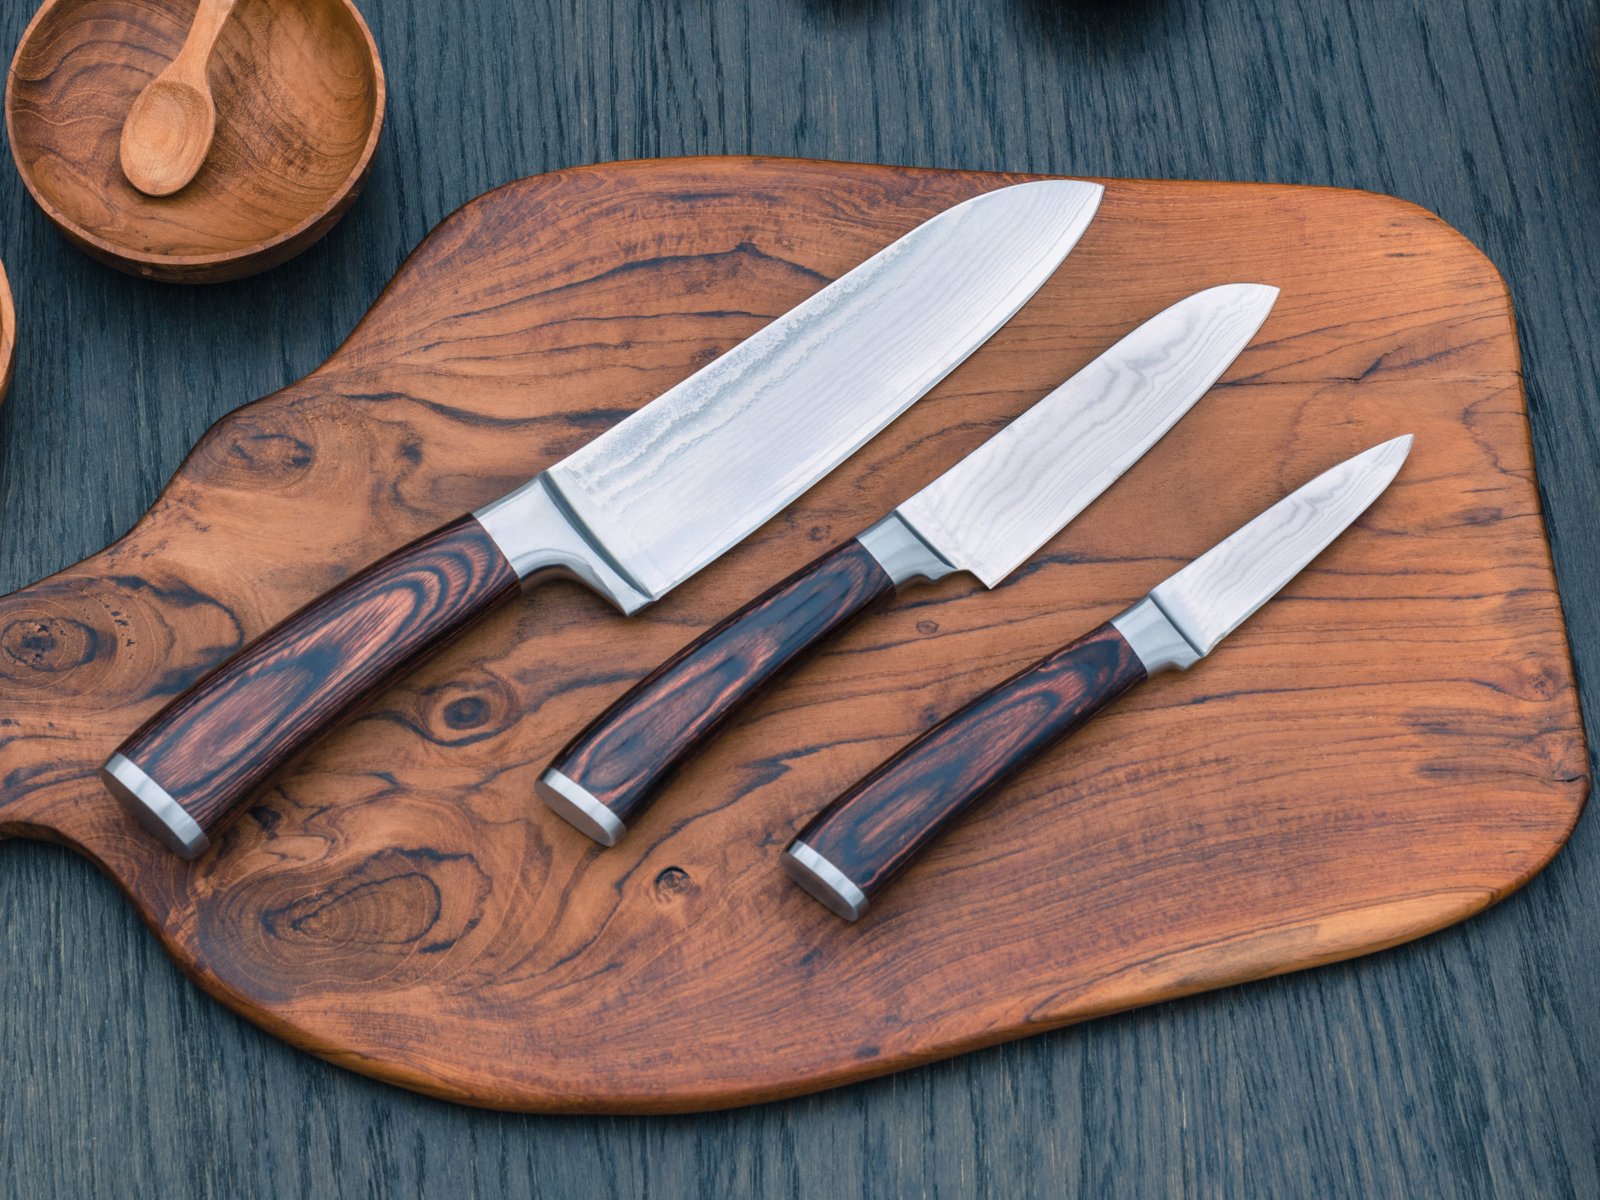 Different knives are specifically designed for different tasks.